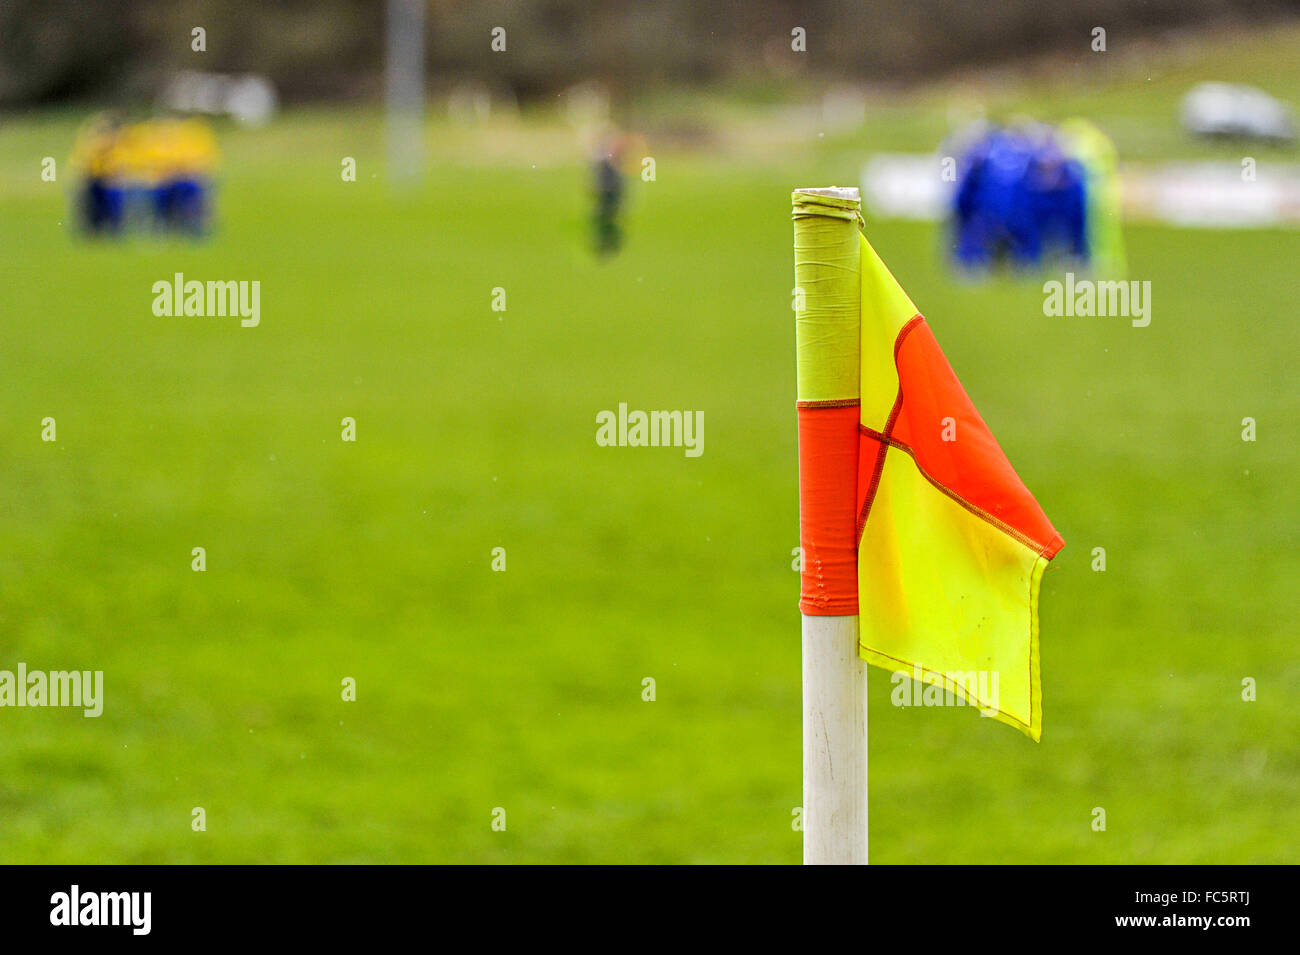 Soccer field with corner flag Stock Photo